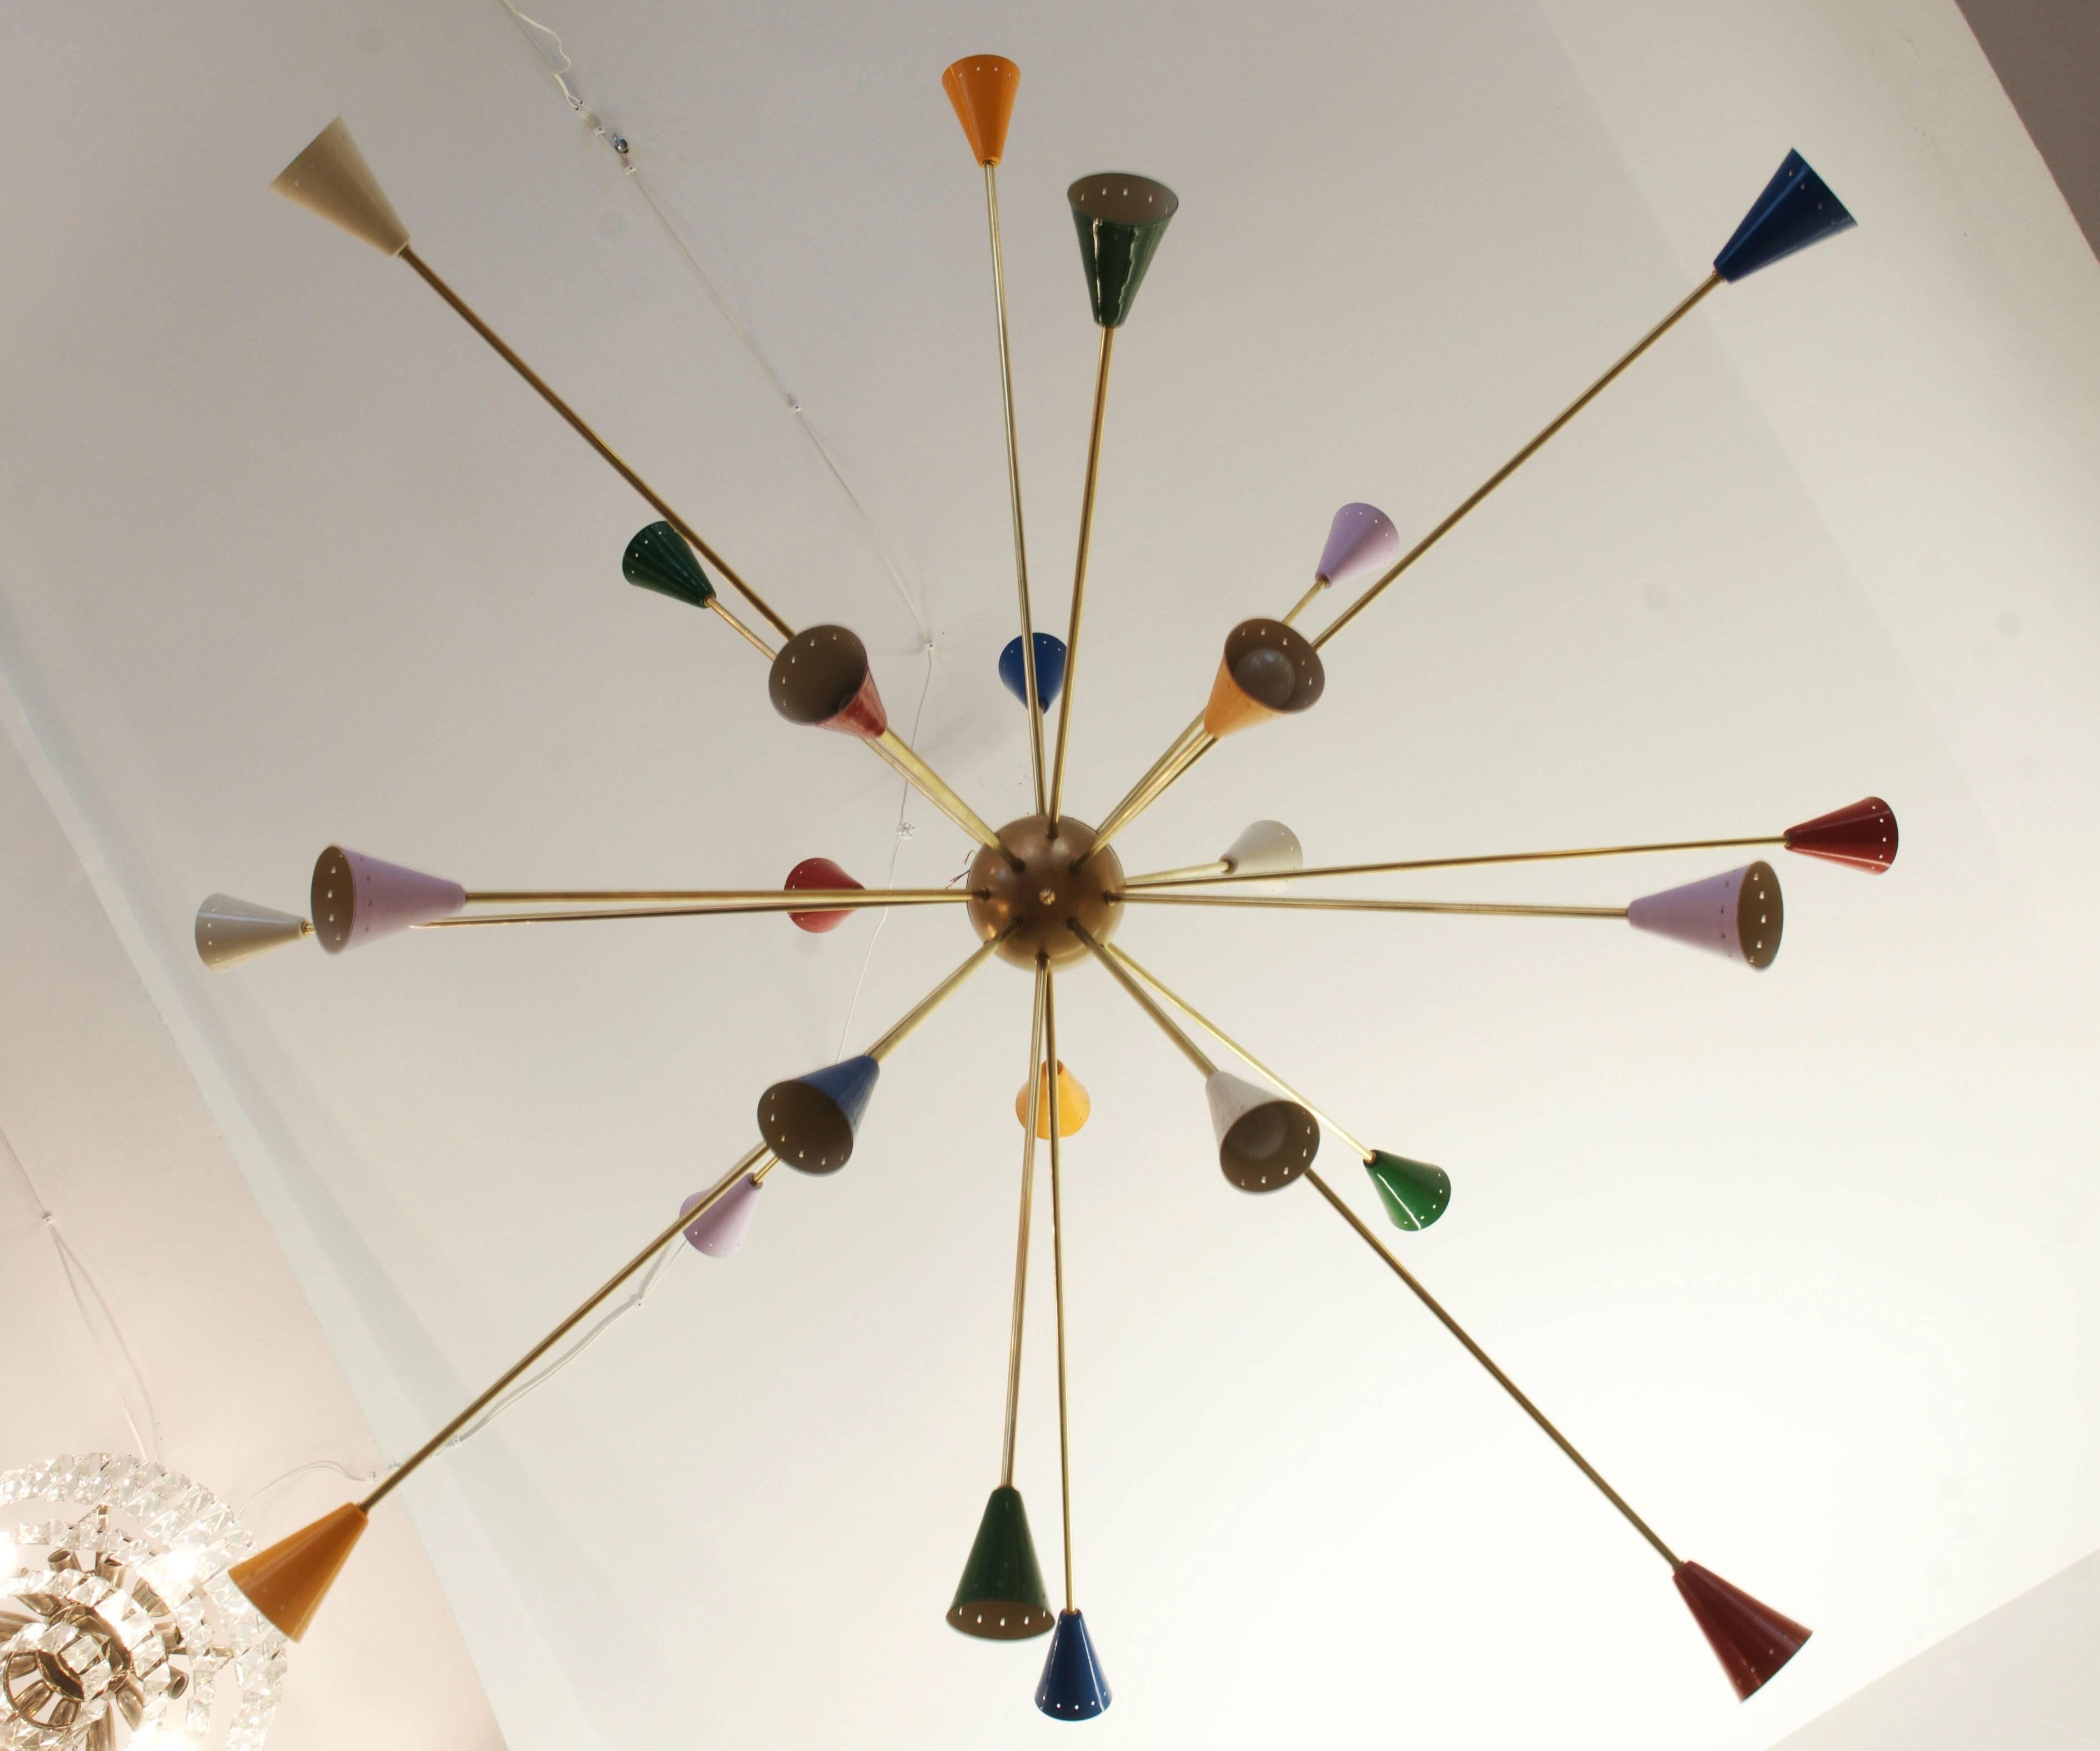 Huge brass construction with 24 arms in different lengths and aluminum cones on the ends painted in different colors, 24 porcelain E14 sockets for max. 40W bulbs or LED bulbs. 
In the style of Stilnovo, Italy from the 1950s.
Dimensions:
Diameter